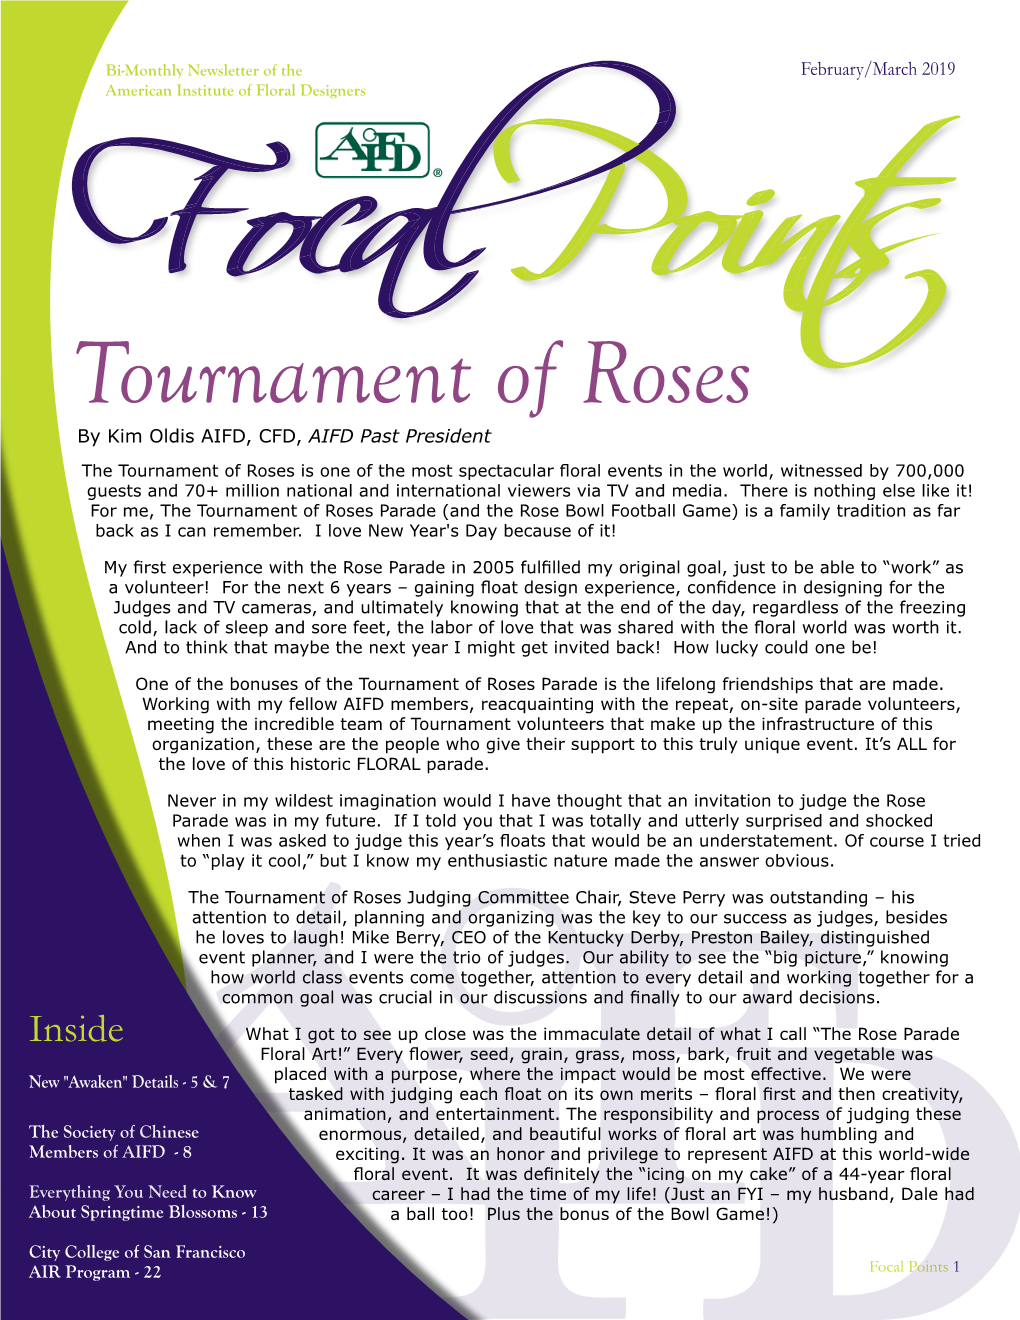 Tournament of Roses by Kim Oldis AIFD, CFD, AIFD Past President